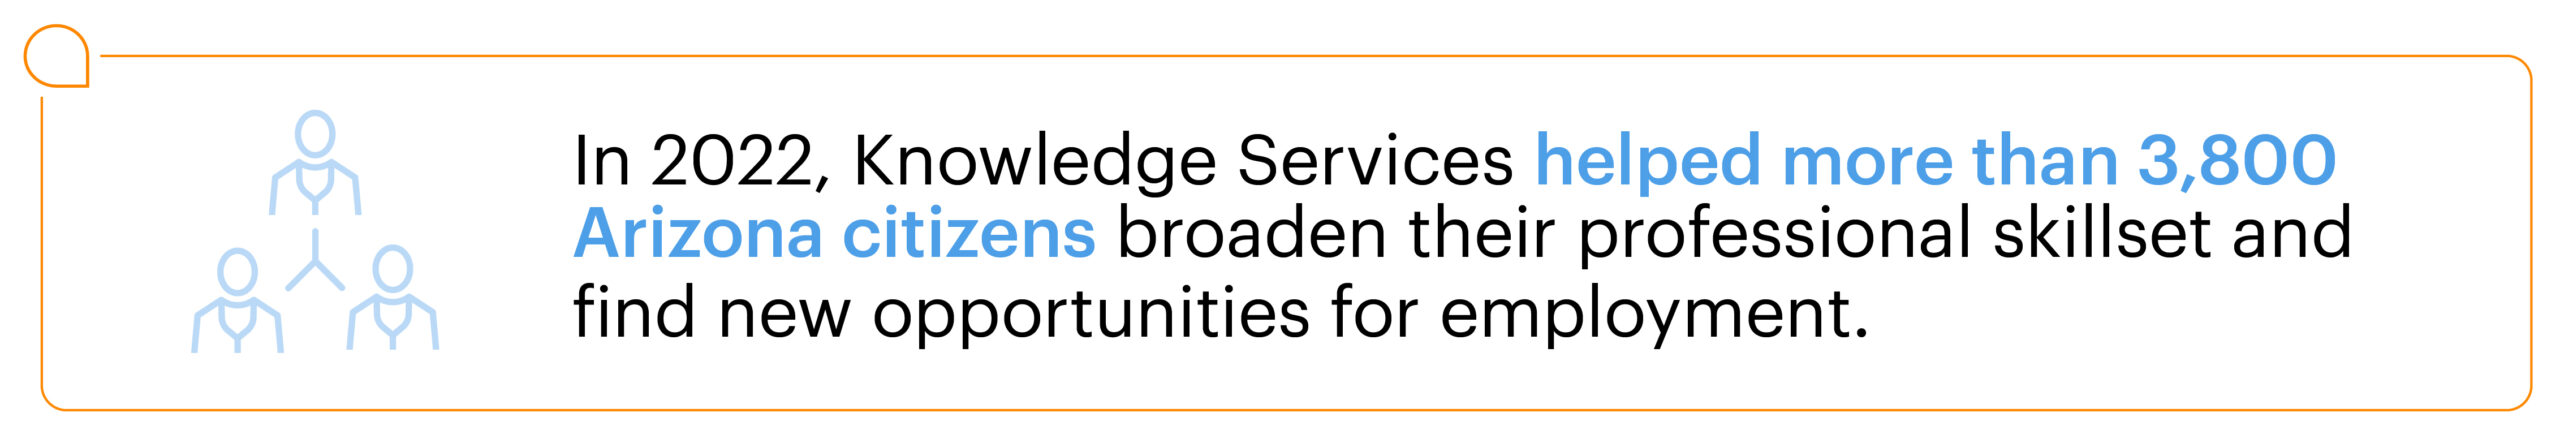 Graphic with an icon of stick figure people and text that says: "In 2022, Knowledge Services helped more than 3,800 Arizona citizens broaden their professional skillset and find new opportunities for employment."